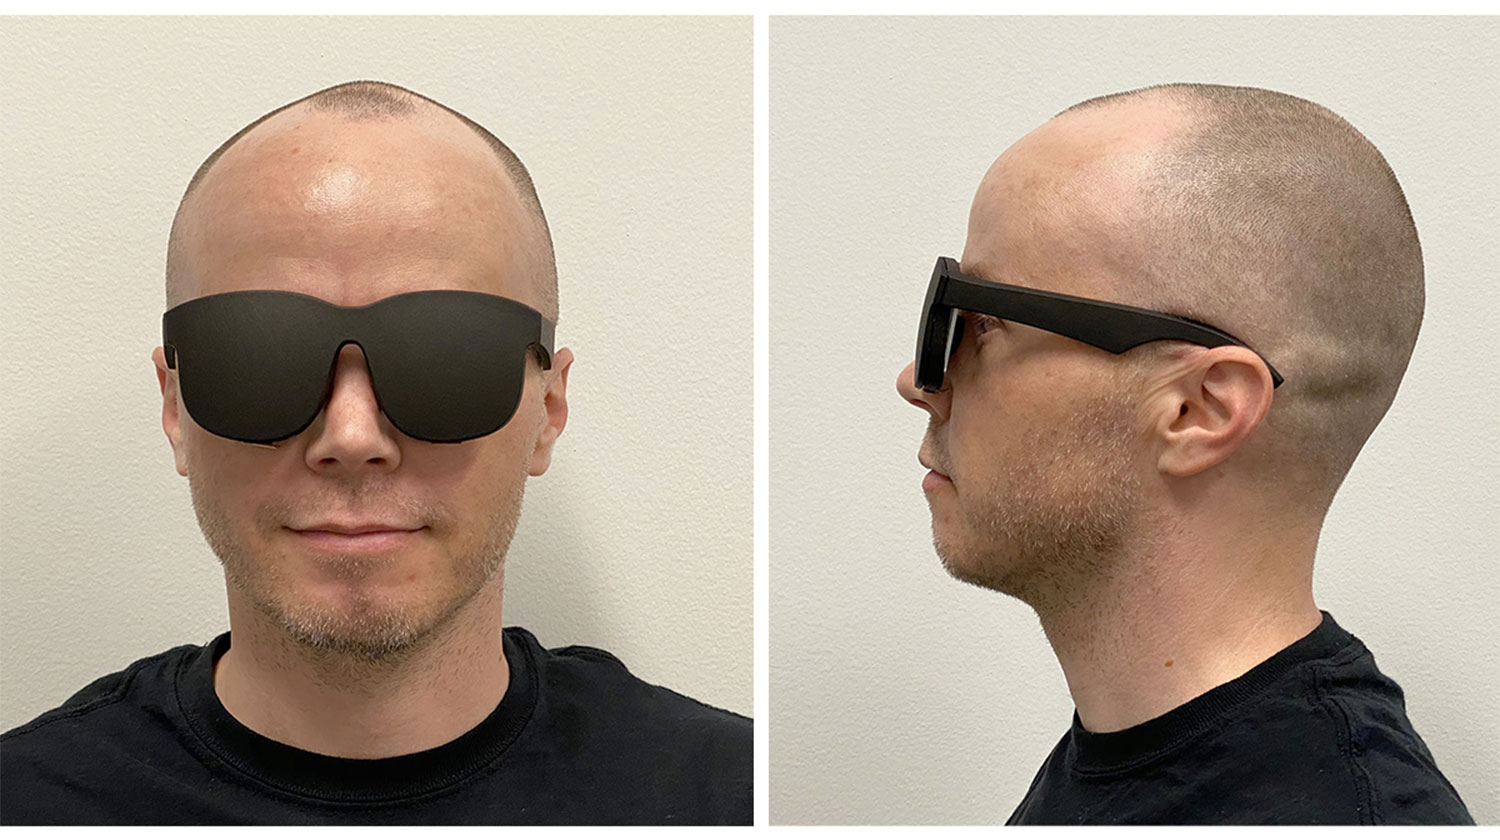 Facebook has a prototype VR headset that looks like a pair of glasses.